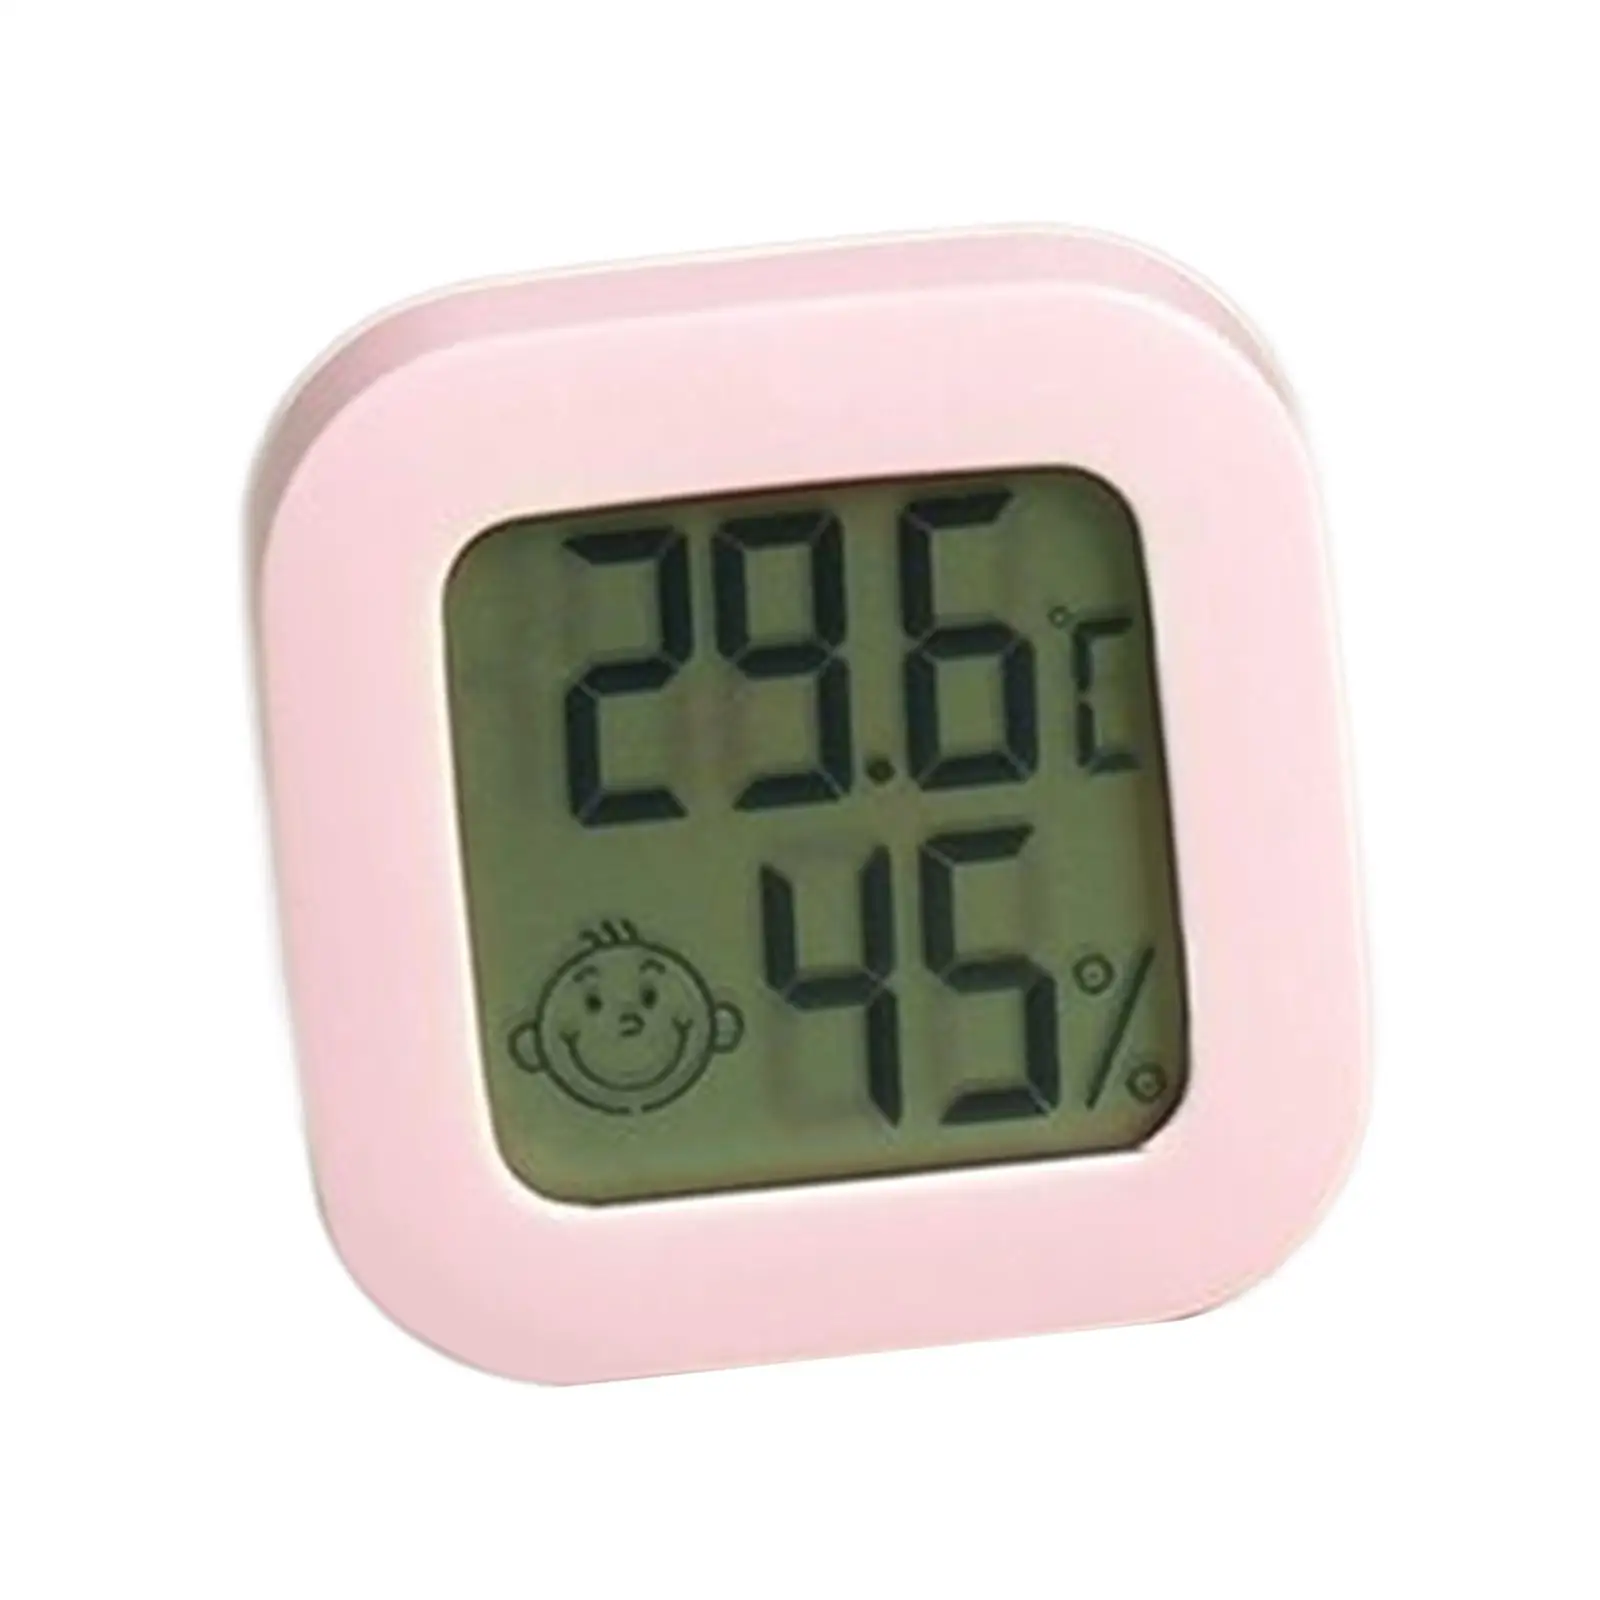 Thermoer Widly Usage Humidity Temperature Monitor for Garden Bedroom Indoor